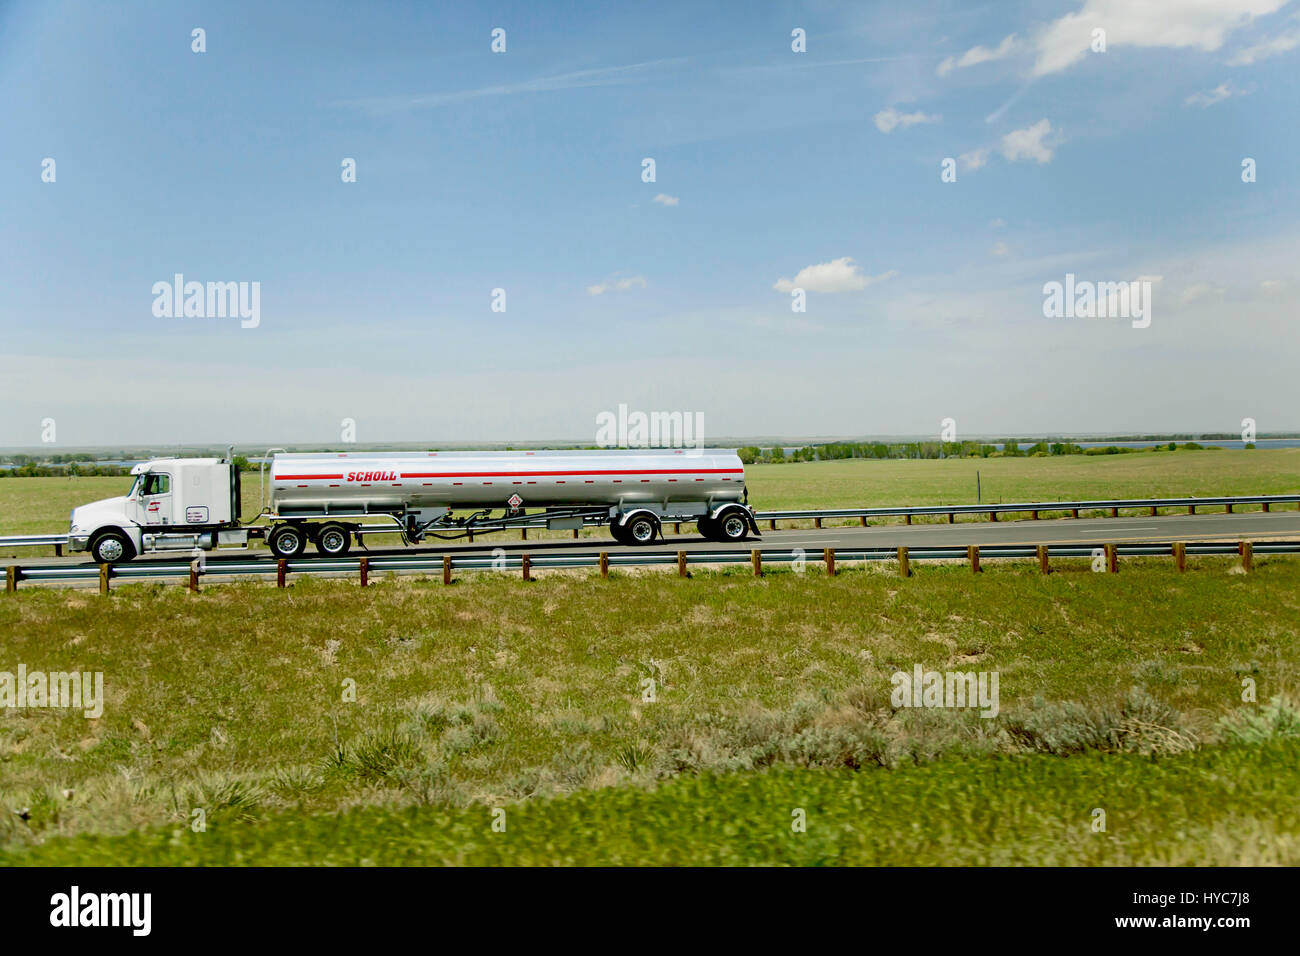 truck on road, united states of america Stock Photo